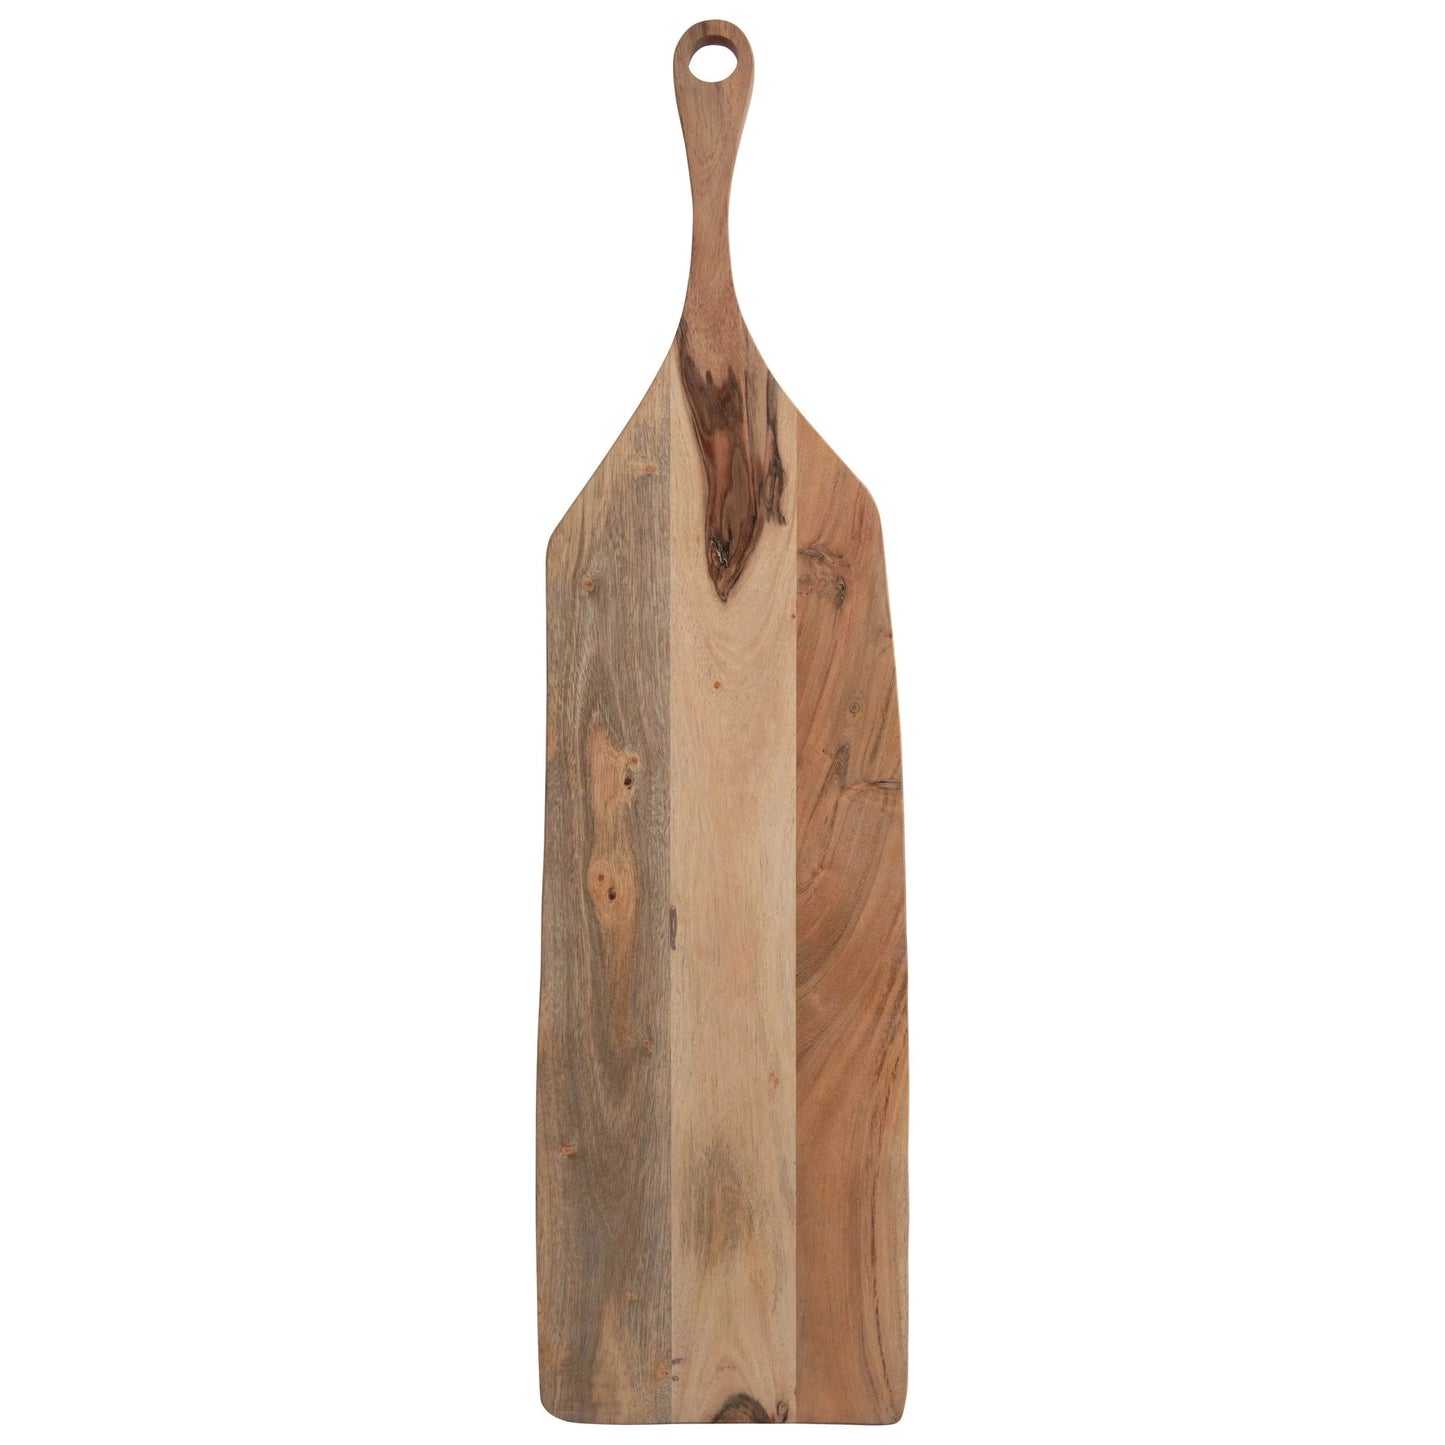 acacia wood board with handle on a white background